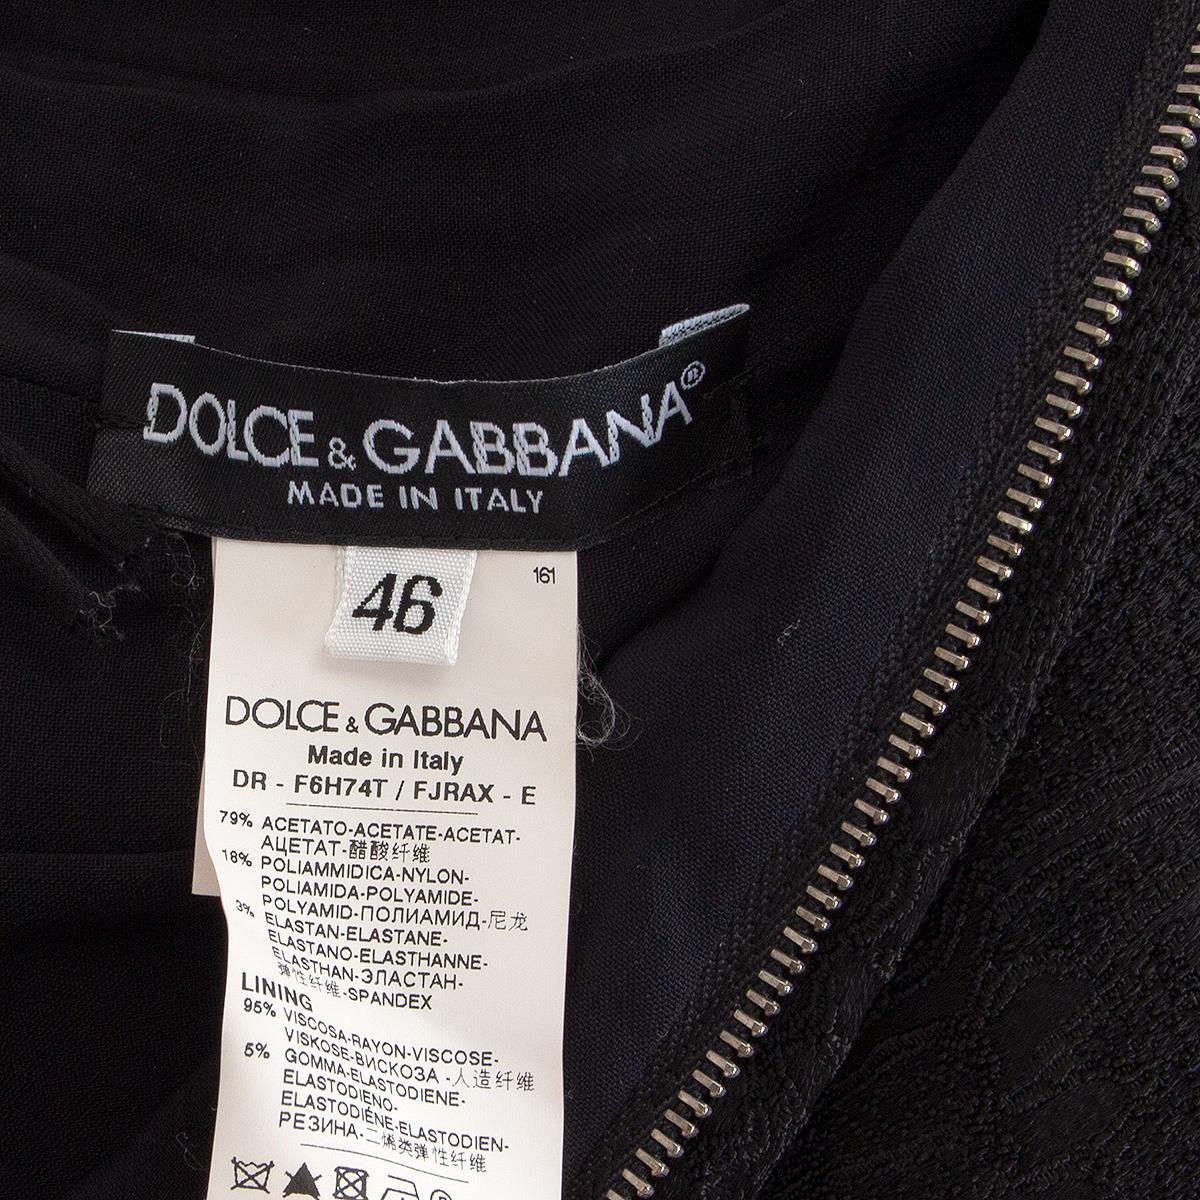 DOLCE & GABBANA black acetate SLEEVELESS JACQUARD SHEATH Dress 46 XL In Excellent Condition For Sale In Zürich, CH